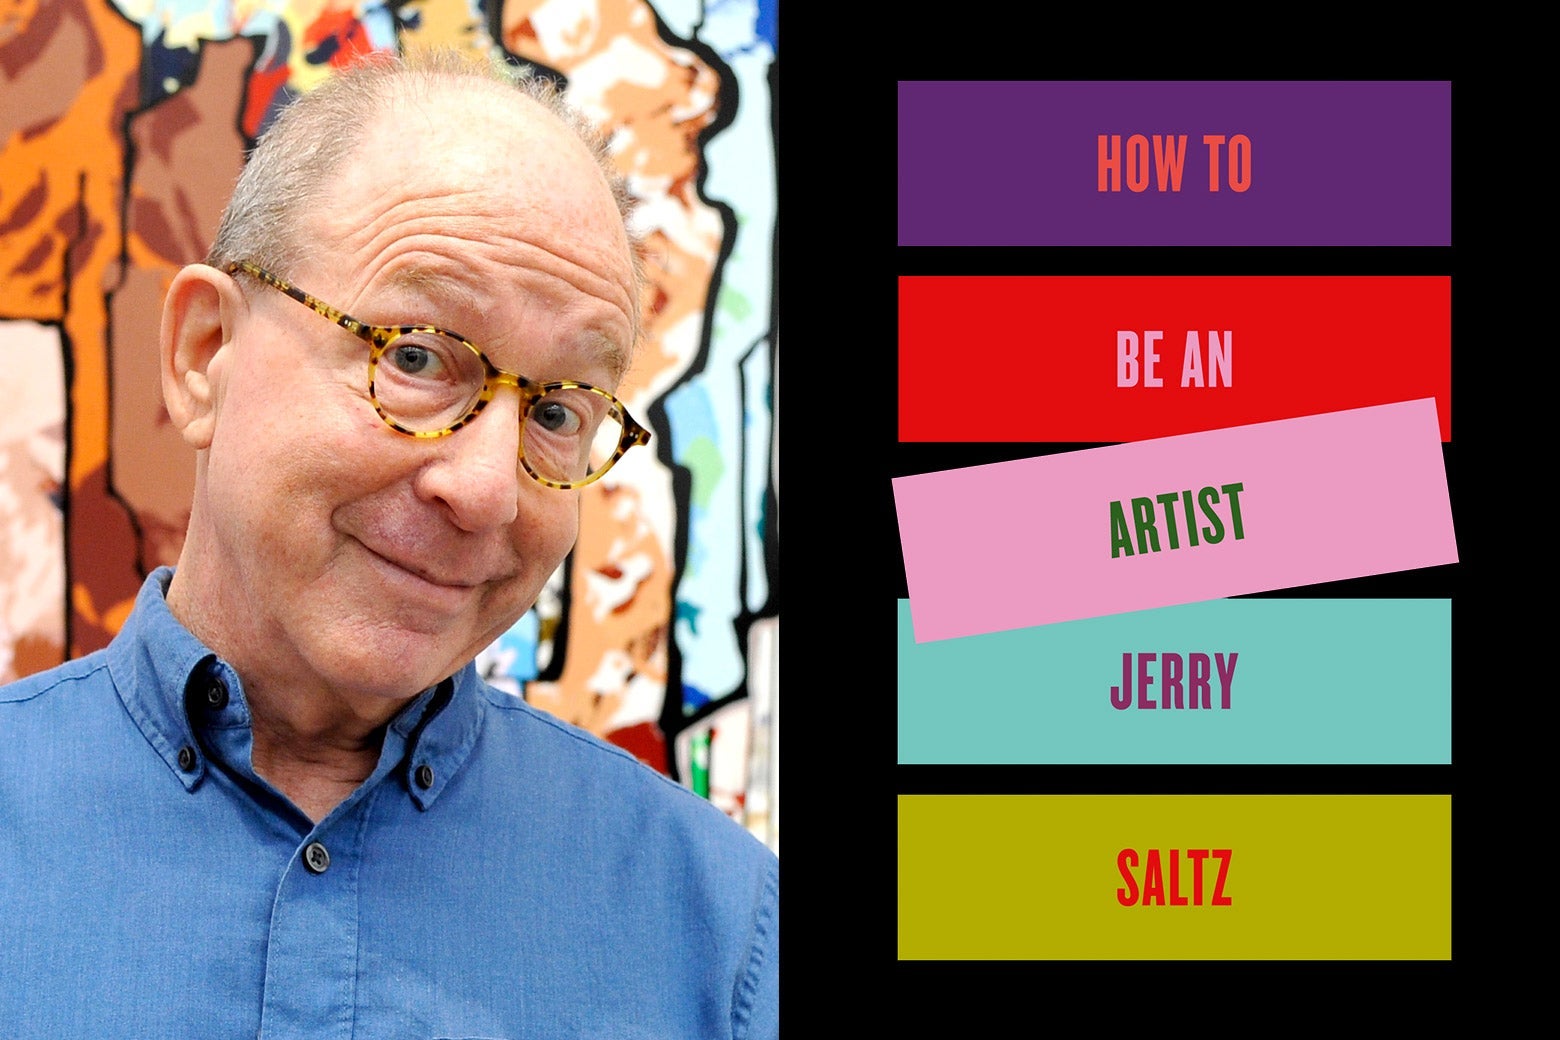 Jerry Saltz and the cover for How To Be An Artist.